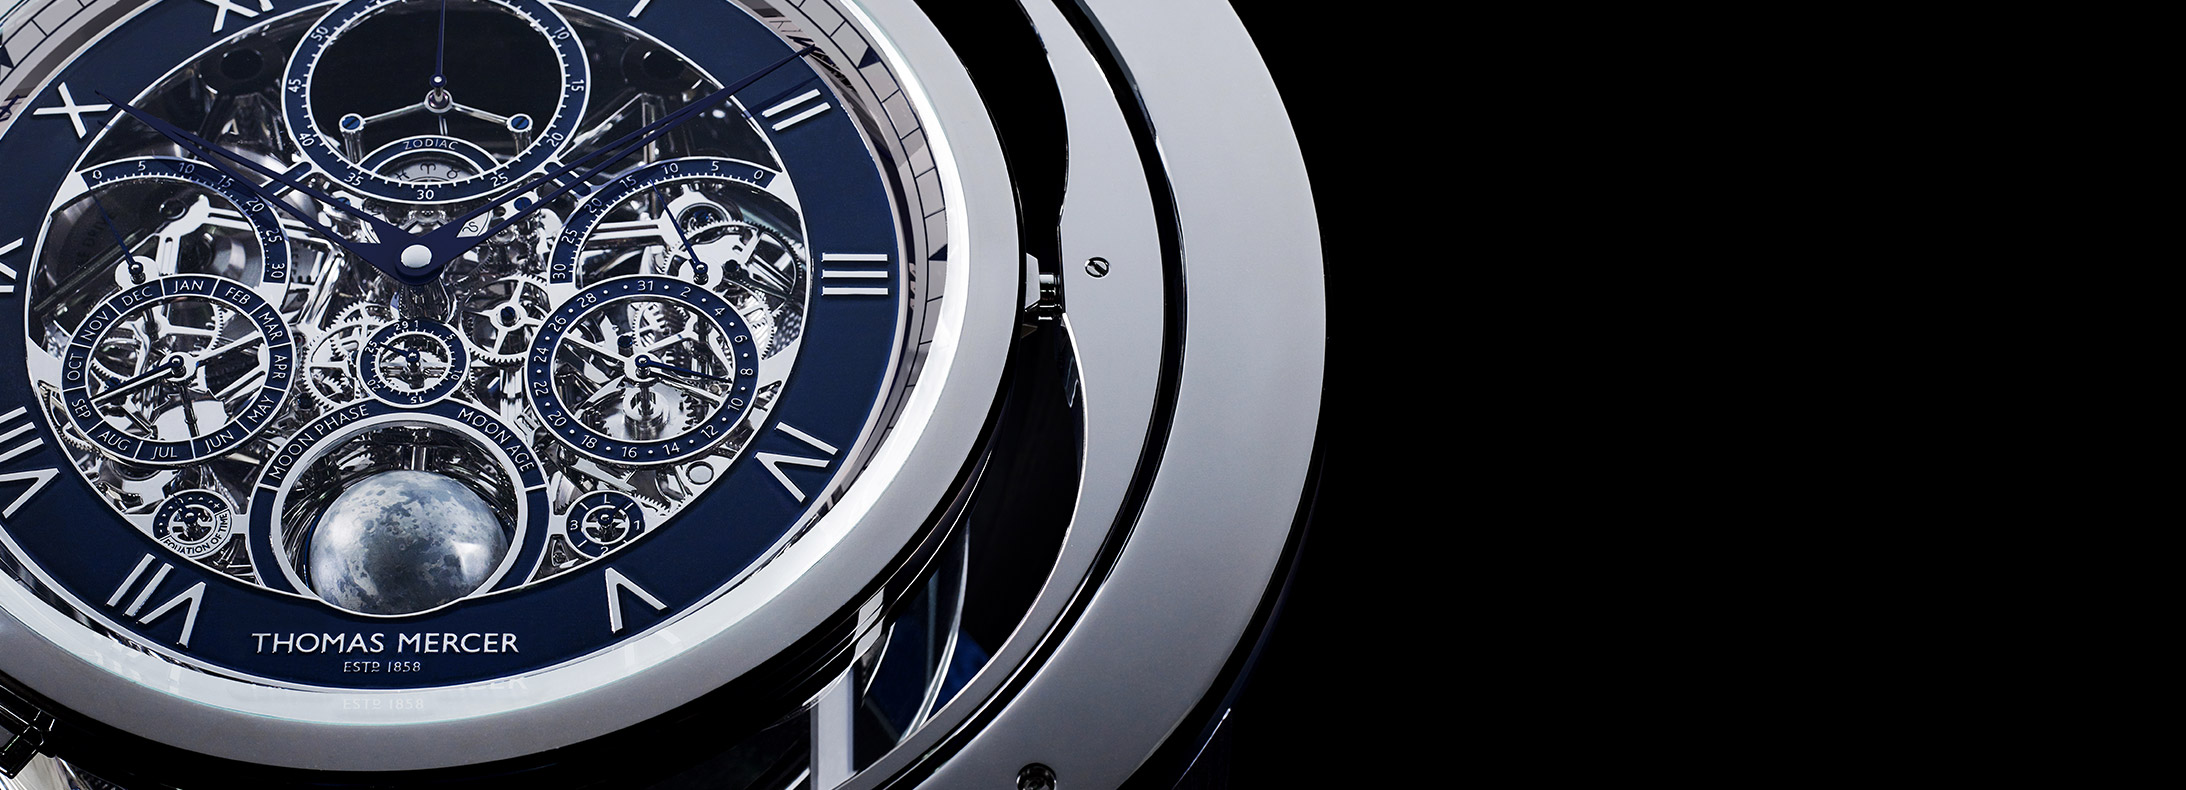 The celebration of horology: perpetual calendar and  equation of time